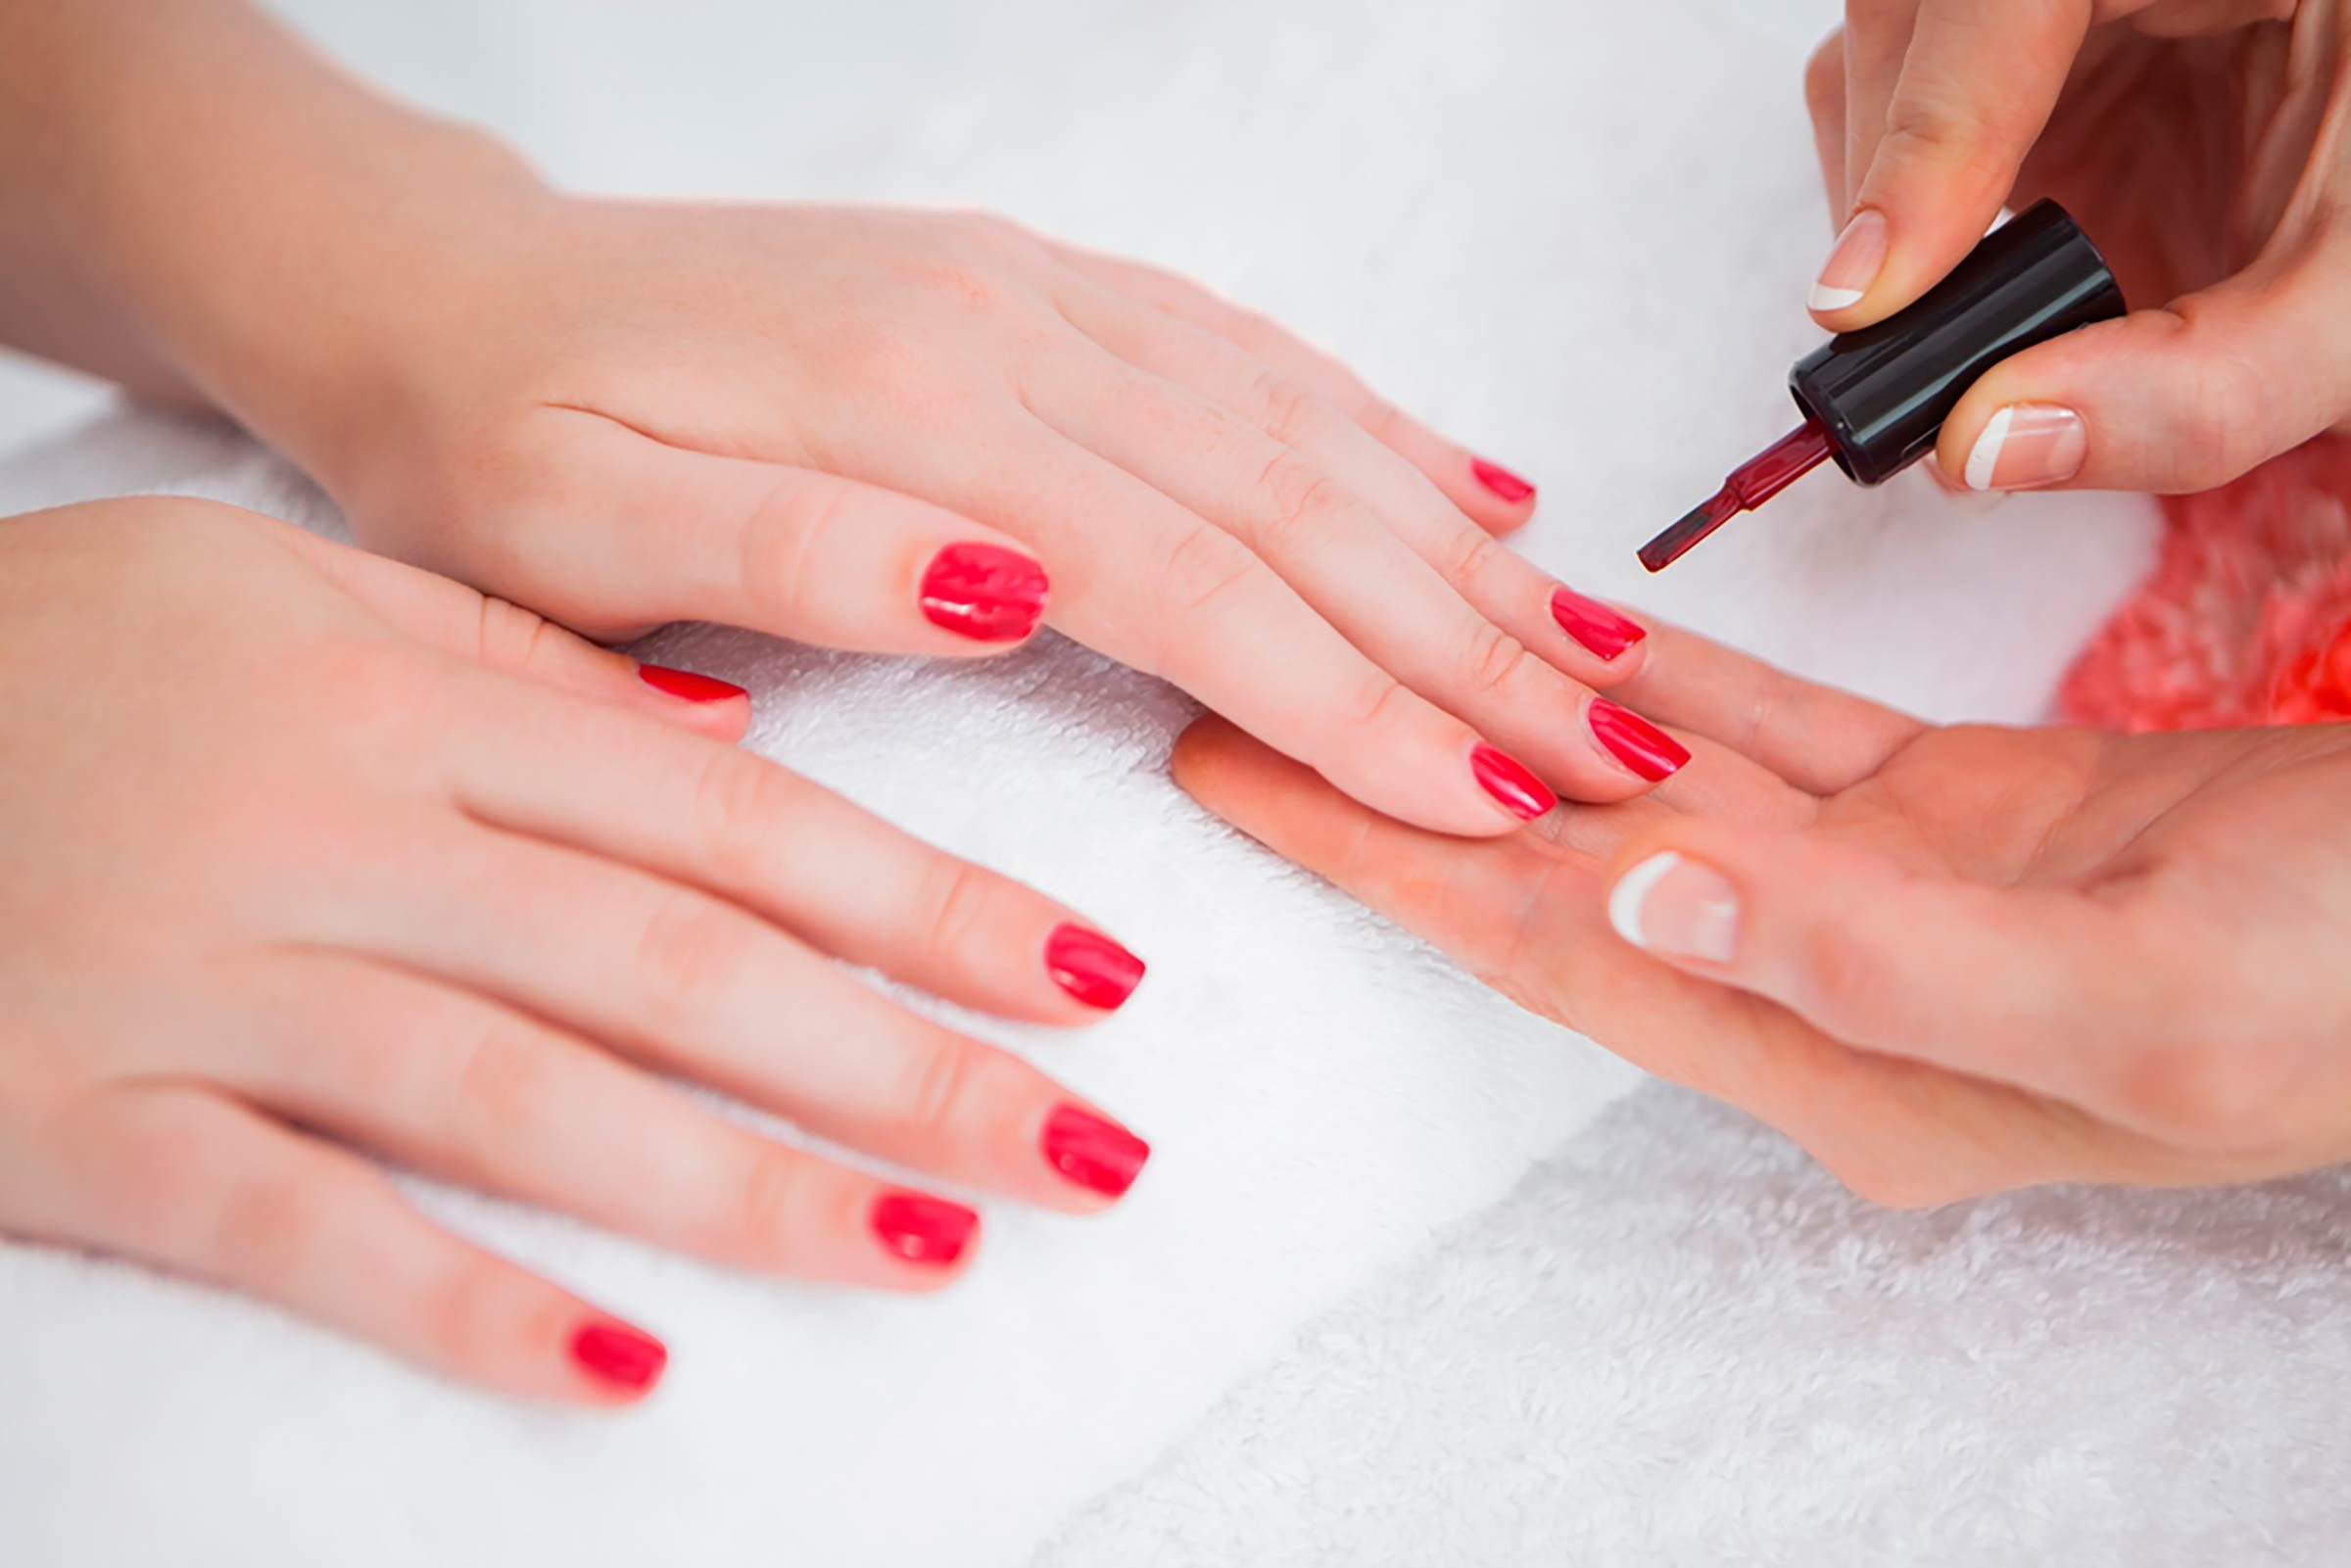 Methyl Methacrylate In Nail Salons What You Need To Know The Healthy